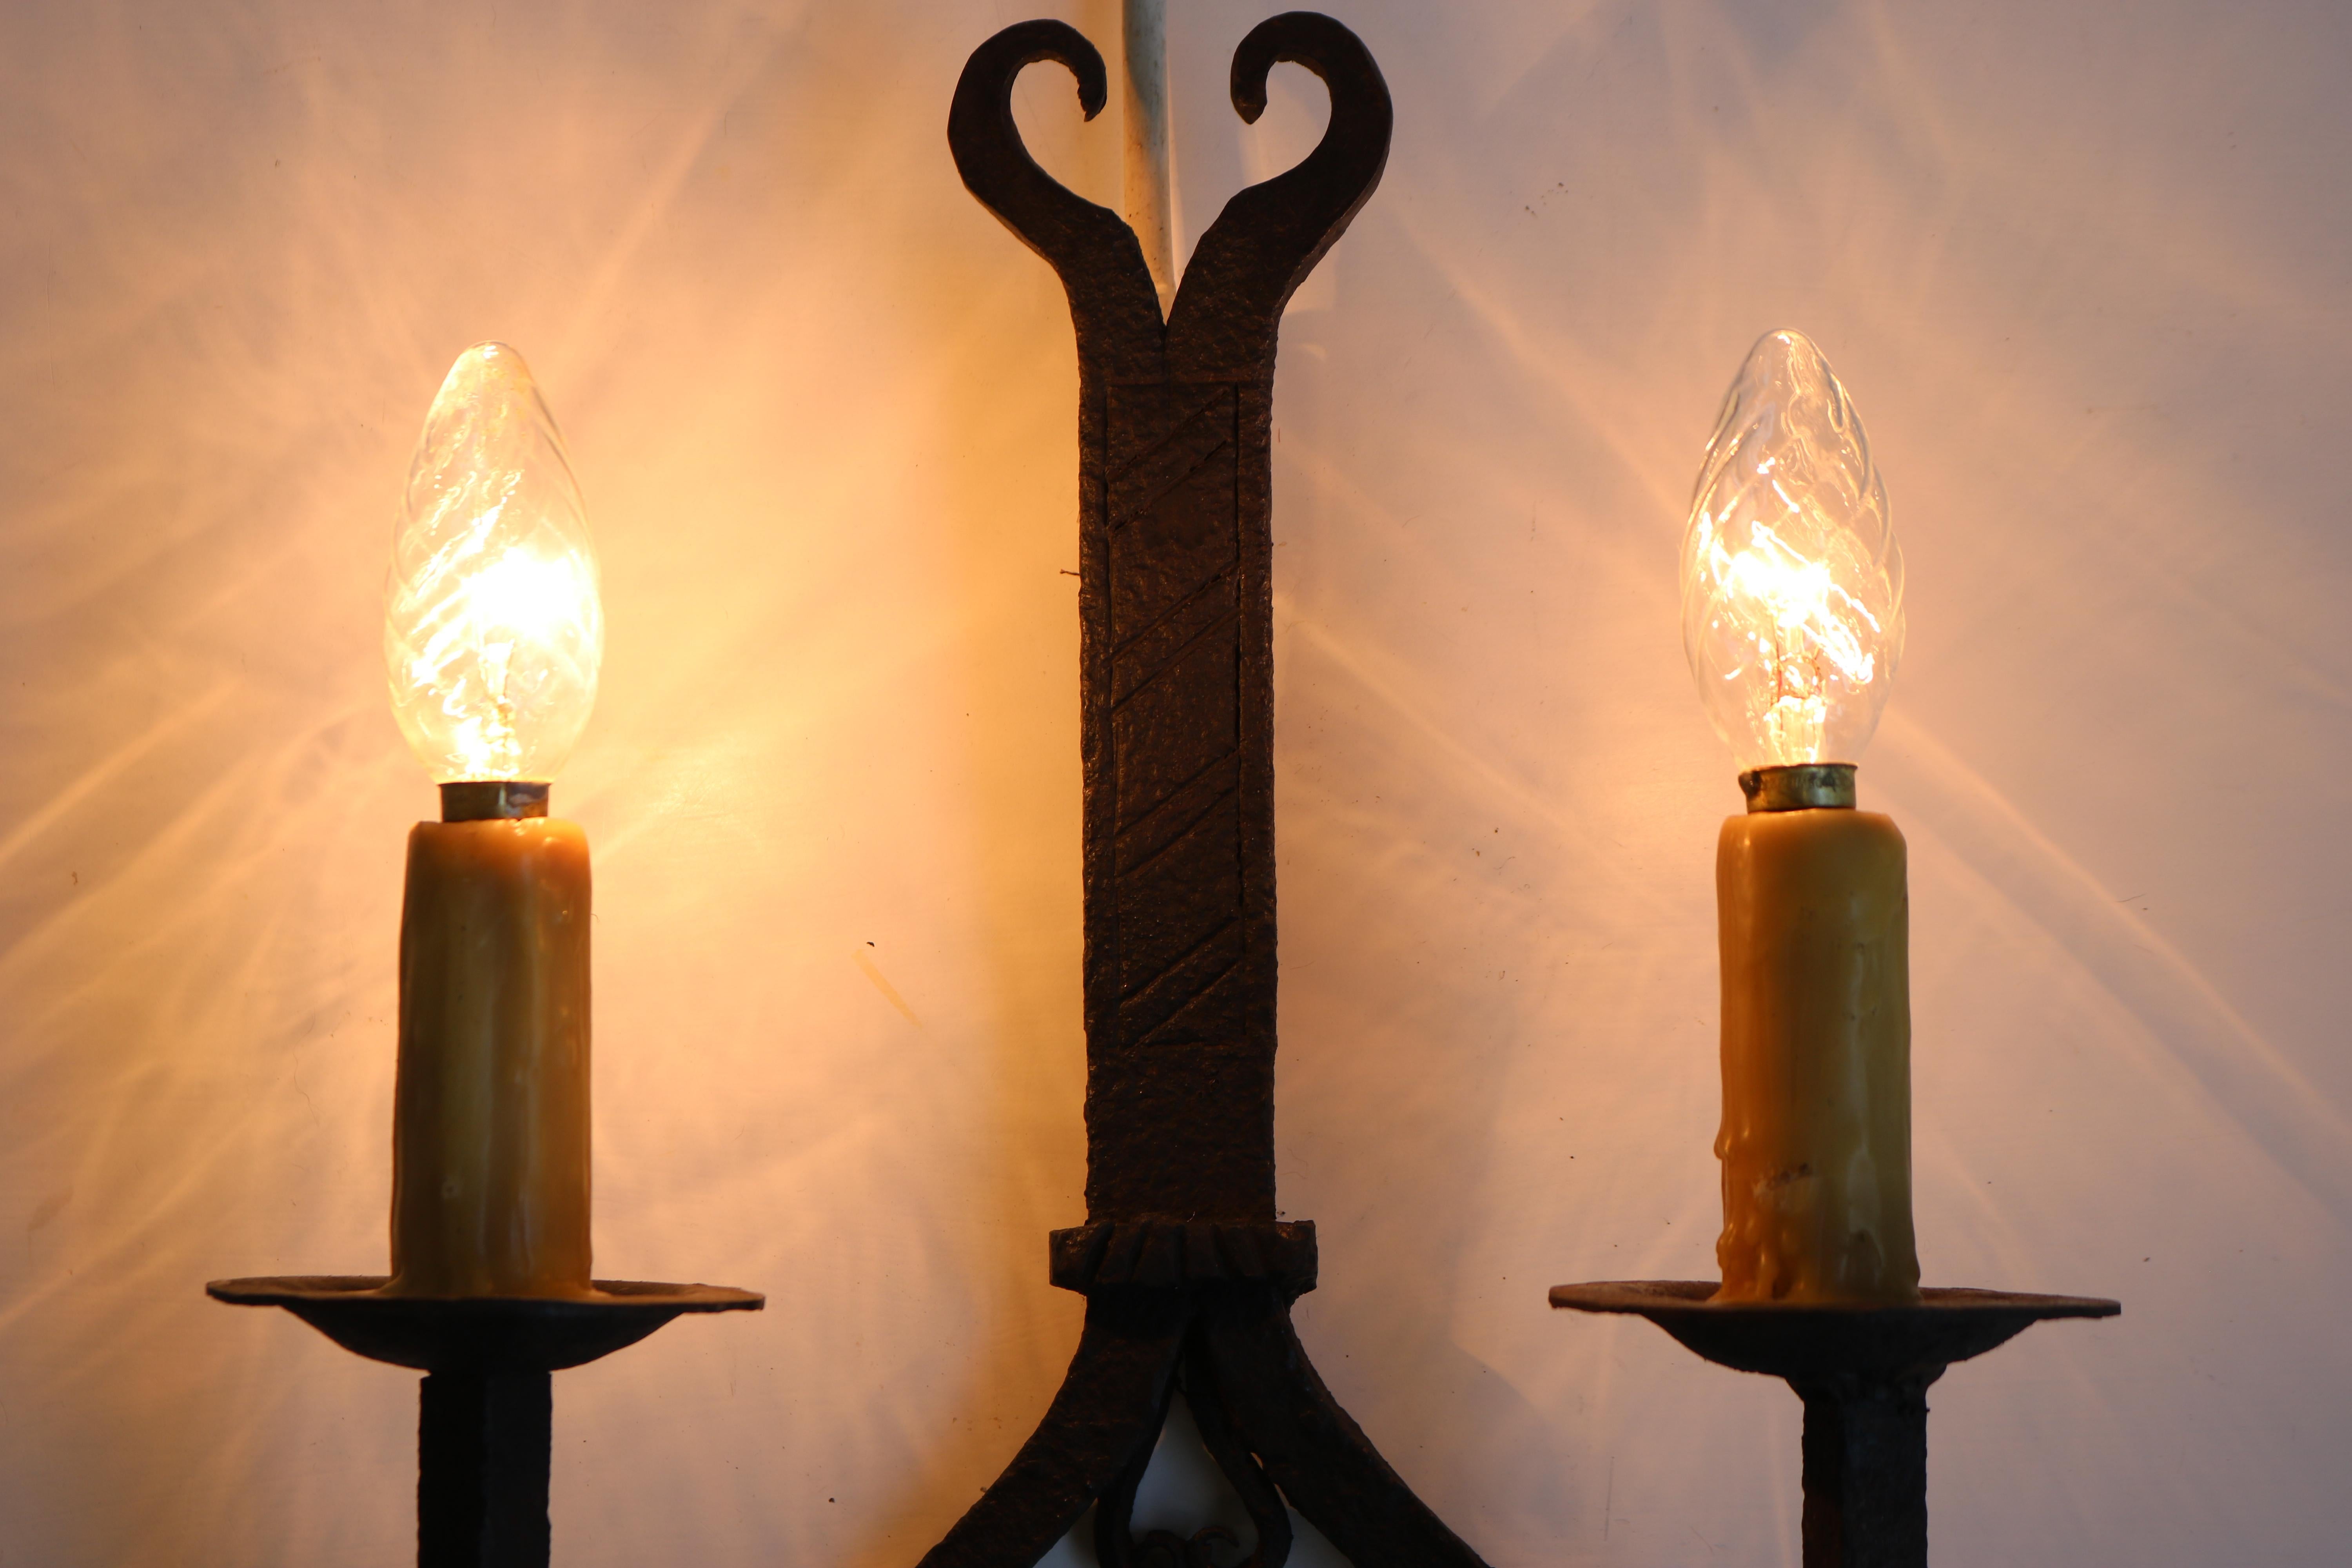 Lovely pair of hand-crafted wrought iron wall lights from France 1900. Gothic revival style or Arts & crafts. 
They are heavy and fully hand made, really gorgeous details. 
Fully original with gorgeous candle wax covered light sockets. 

One of